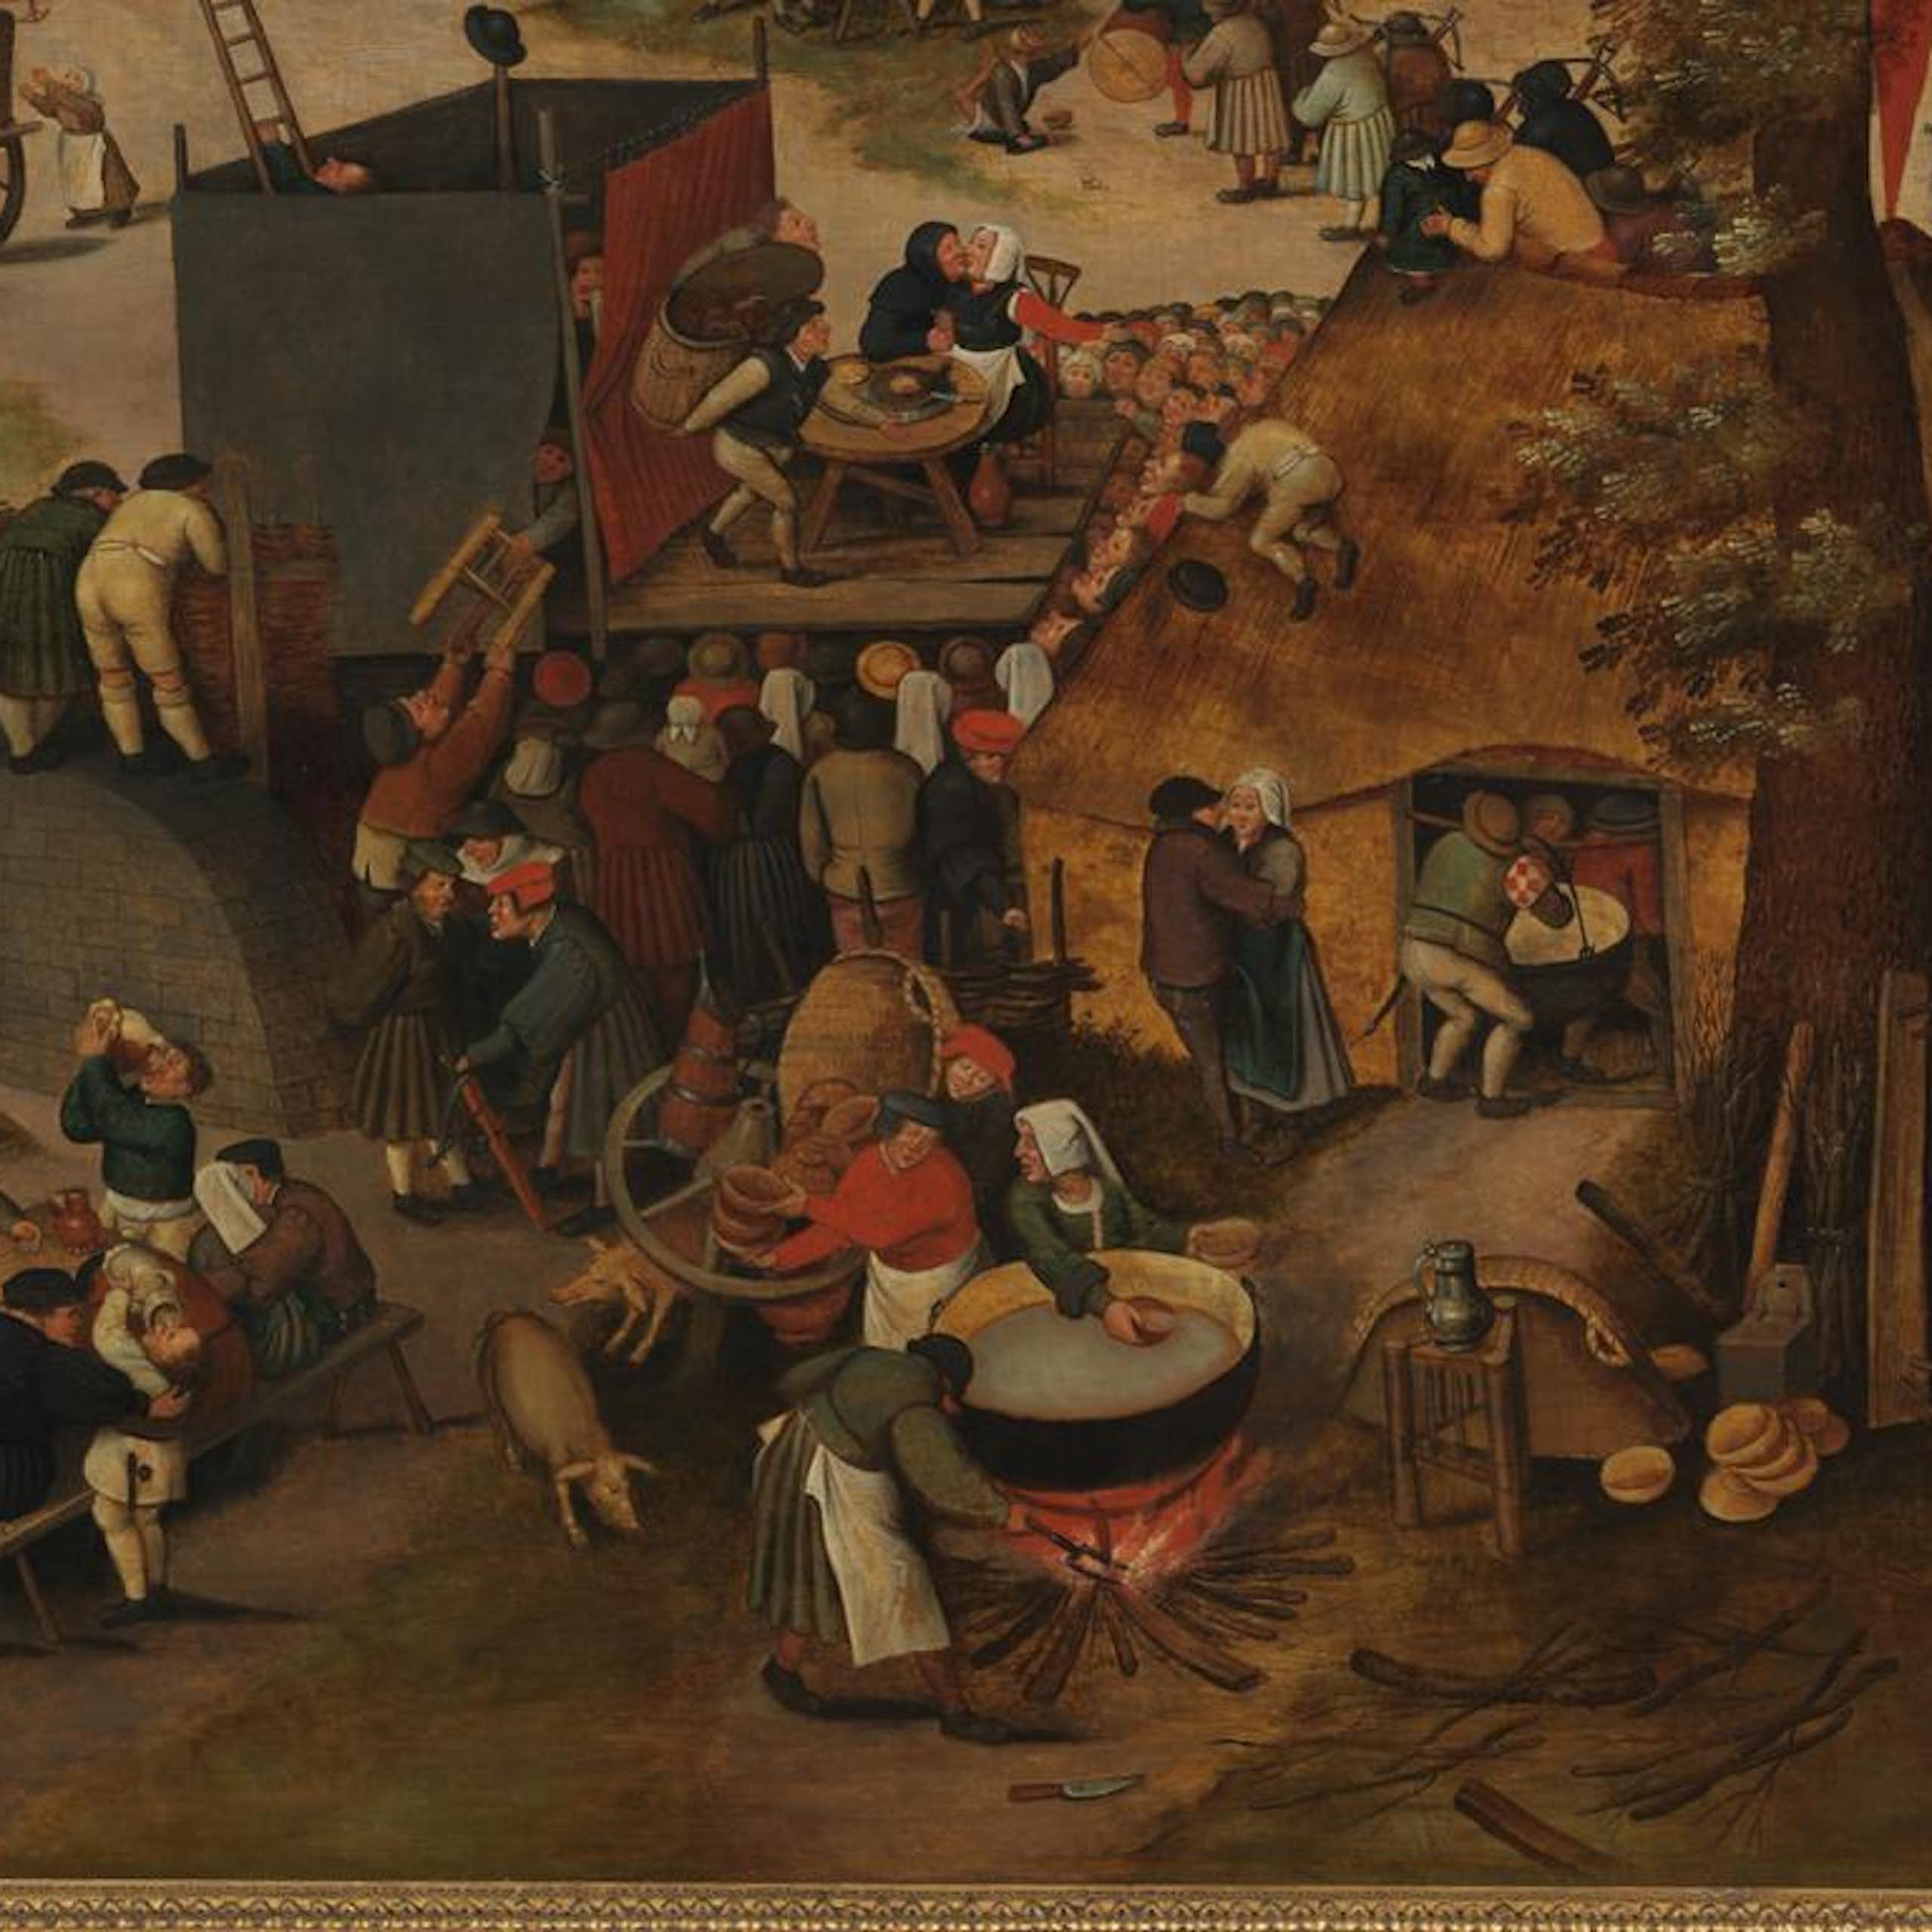 A painting of people in a village putting on a play.